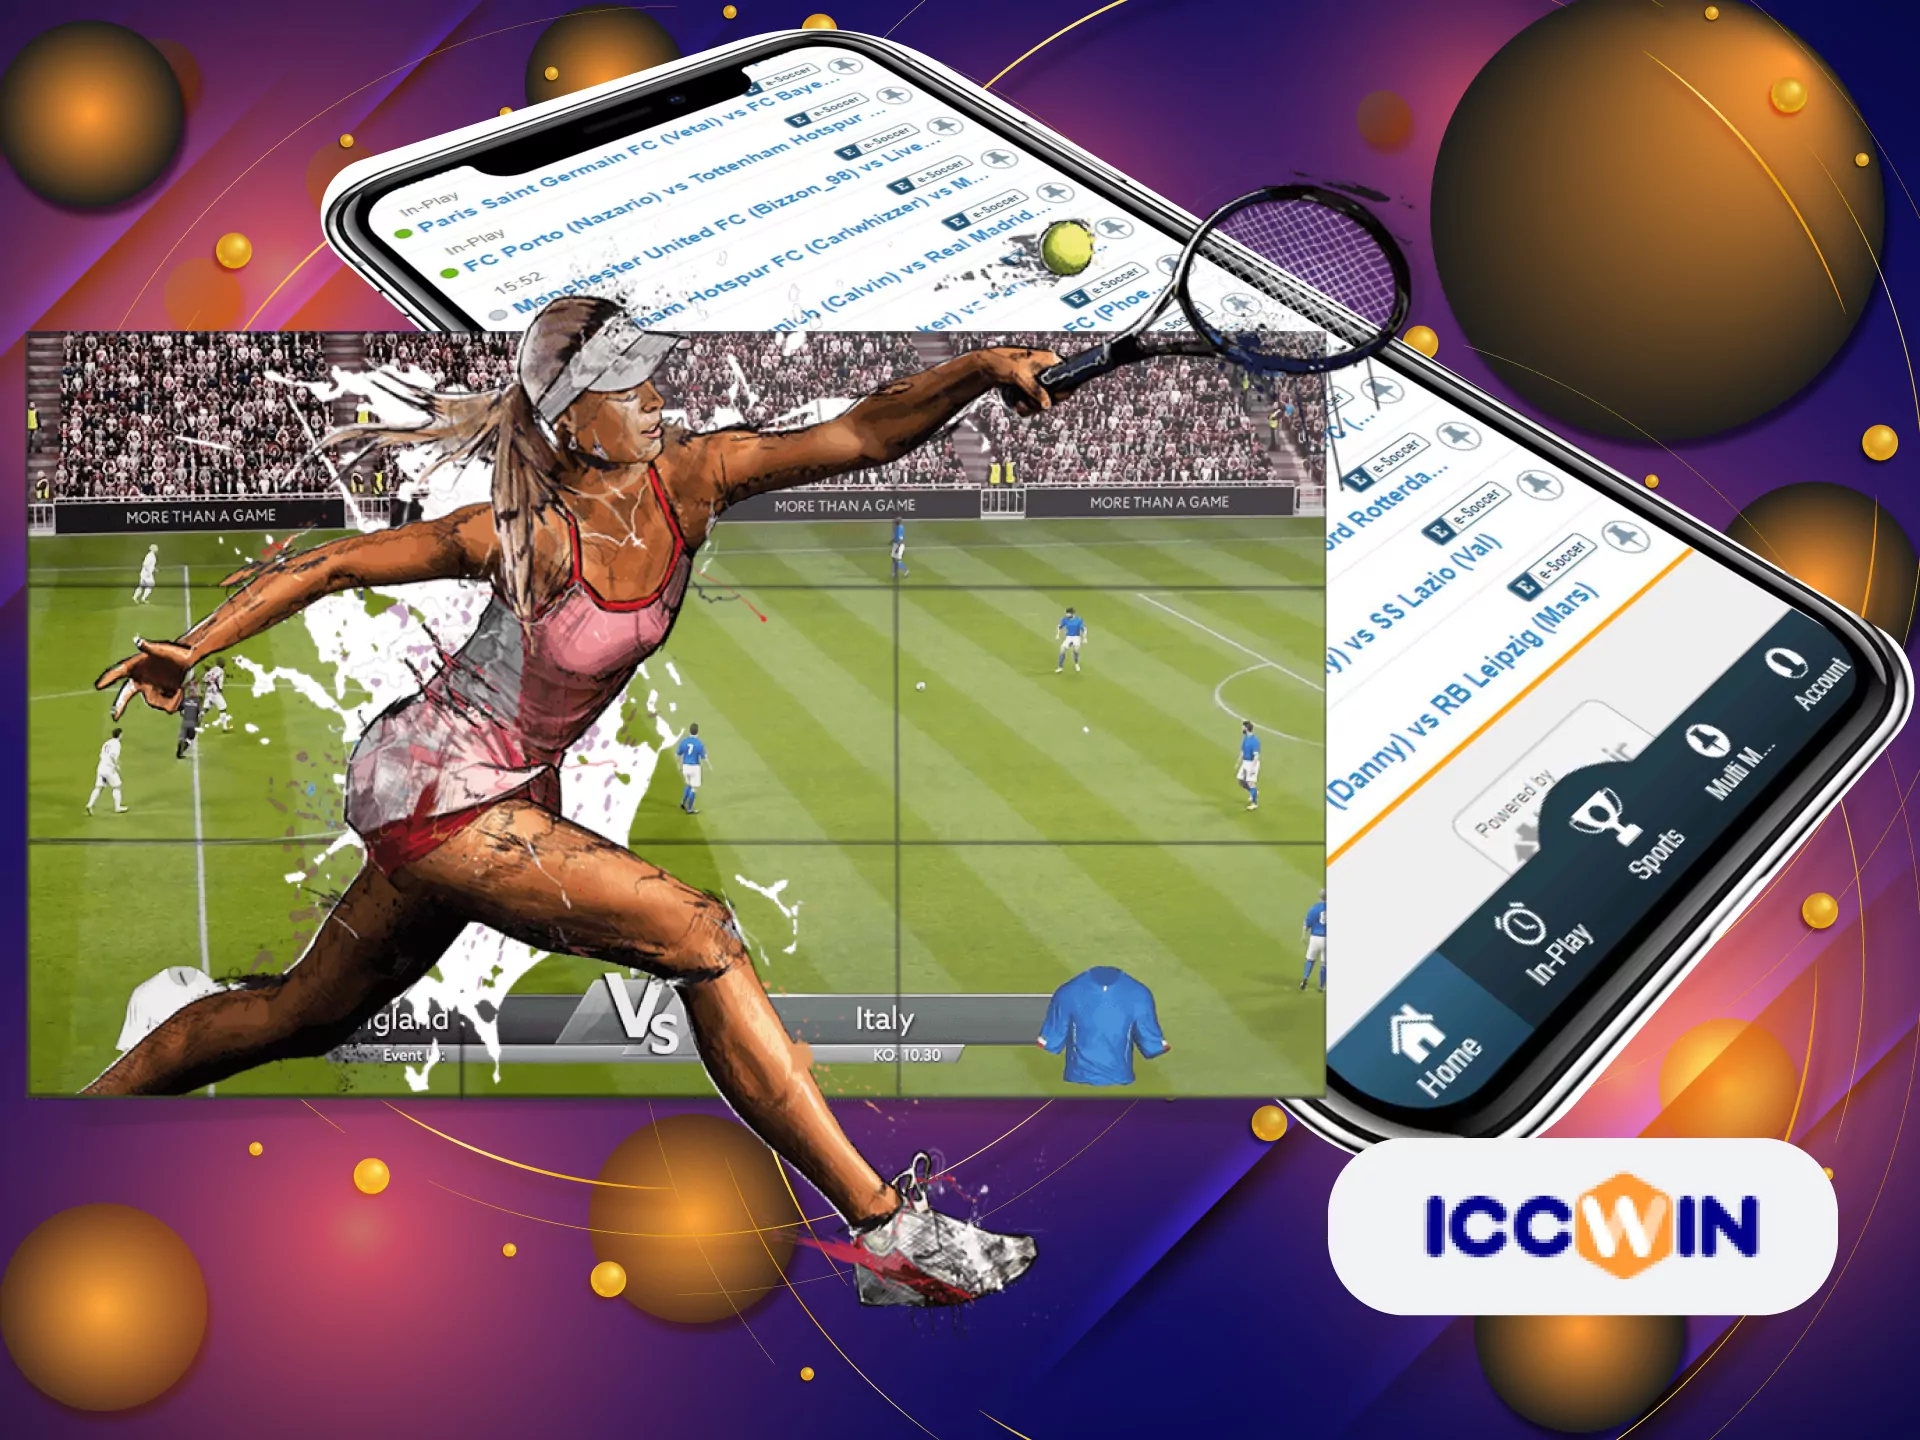 Virtual sports is also available for betting at ICCWIN.